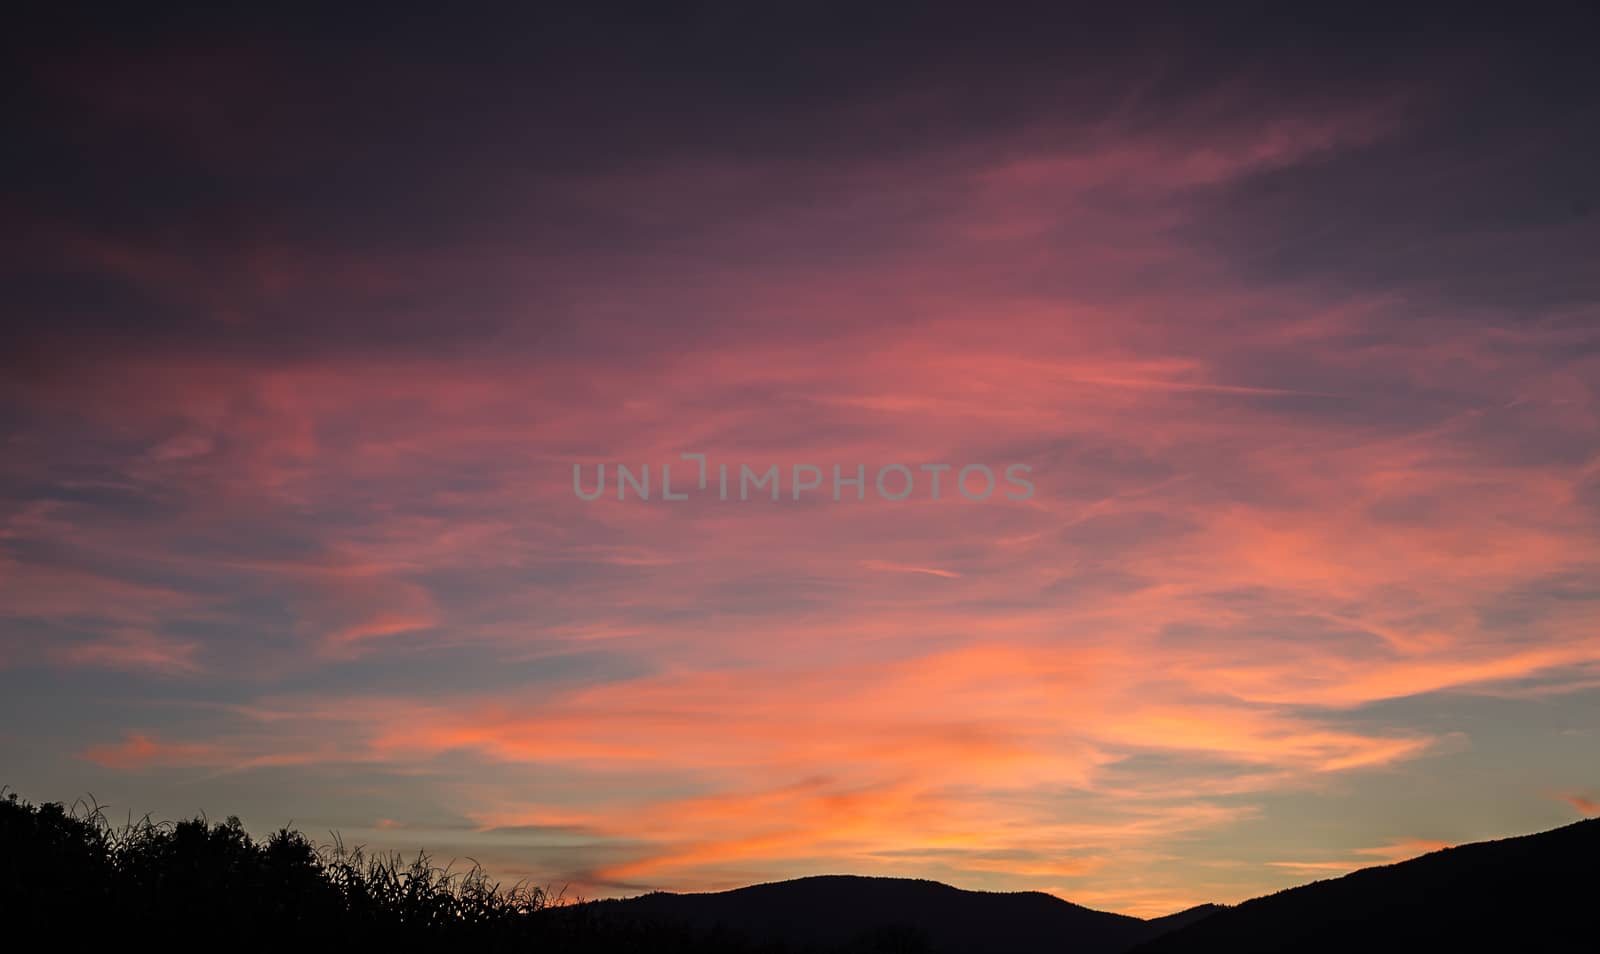 Sunset with landscape silhouette by photosampler